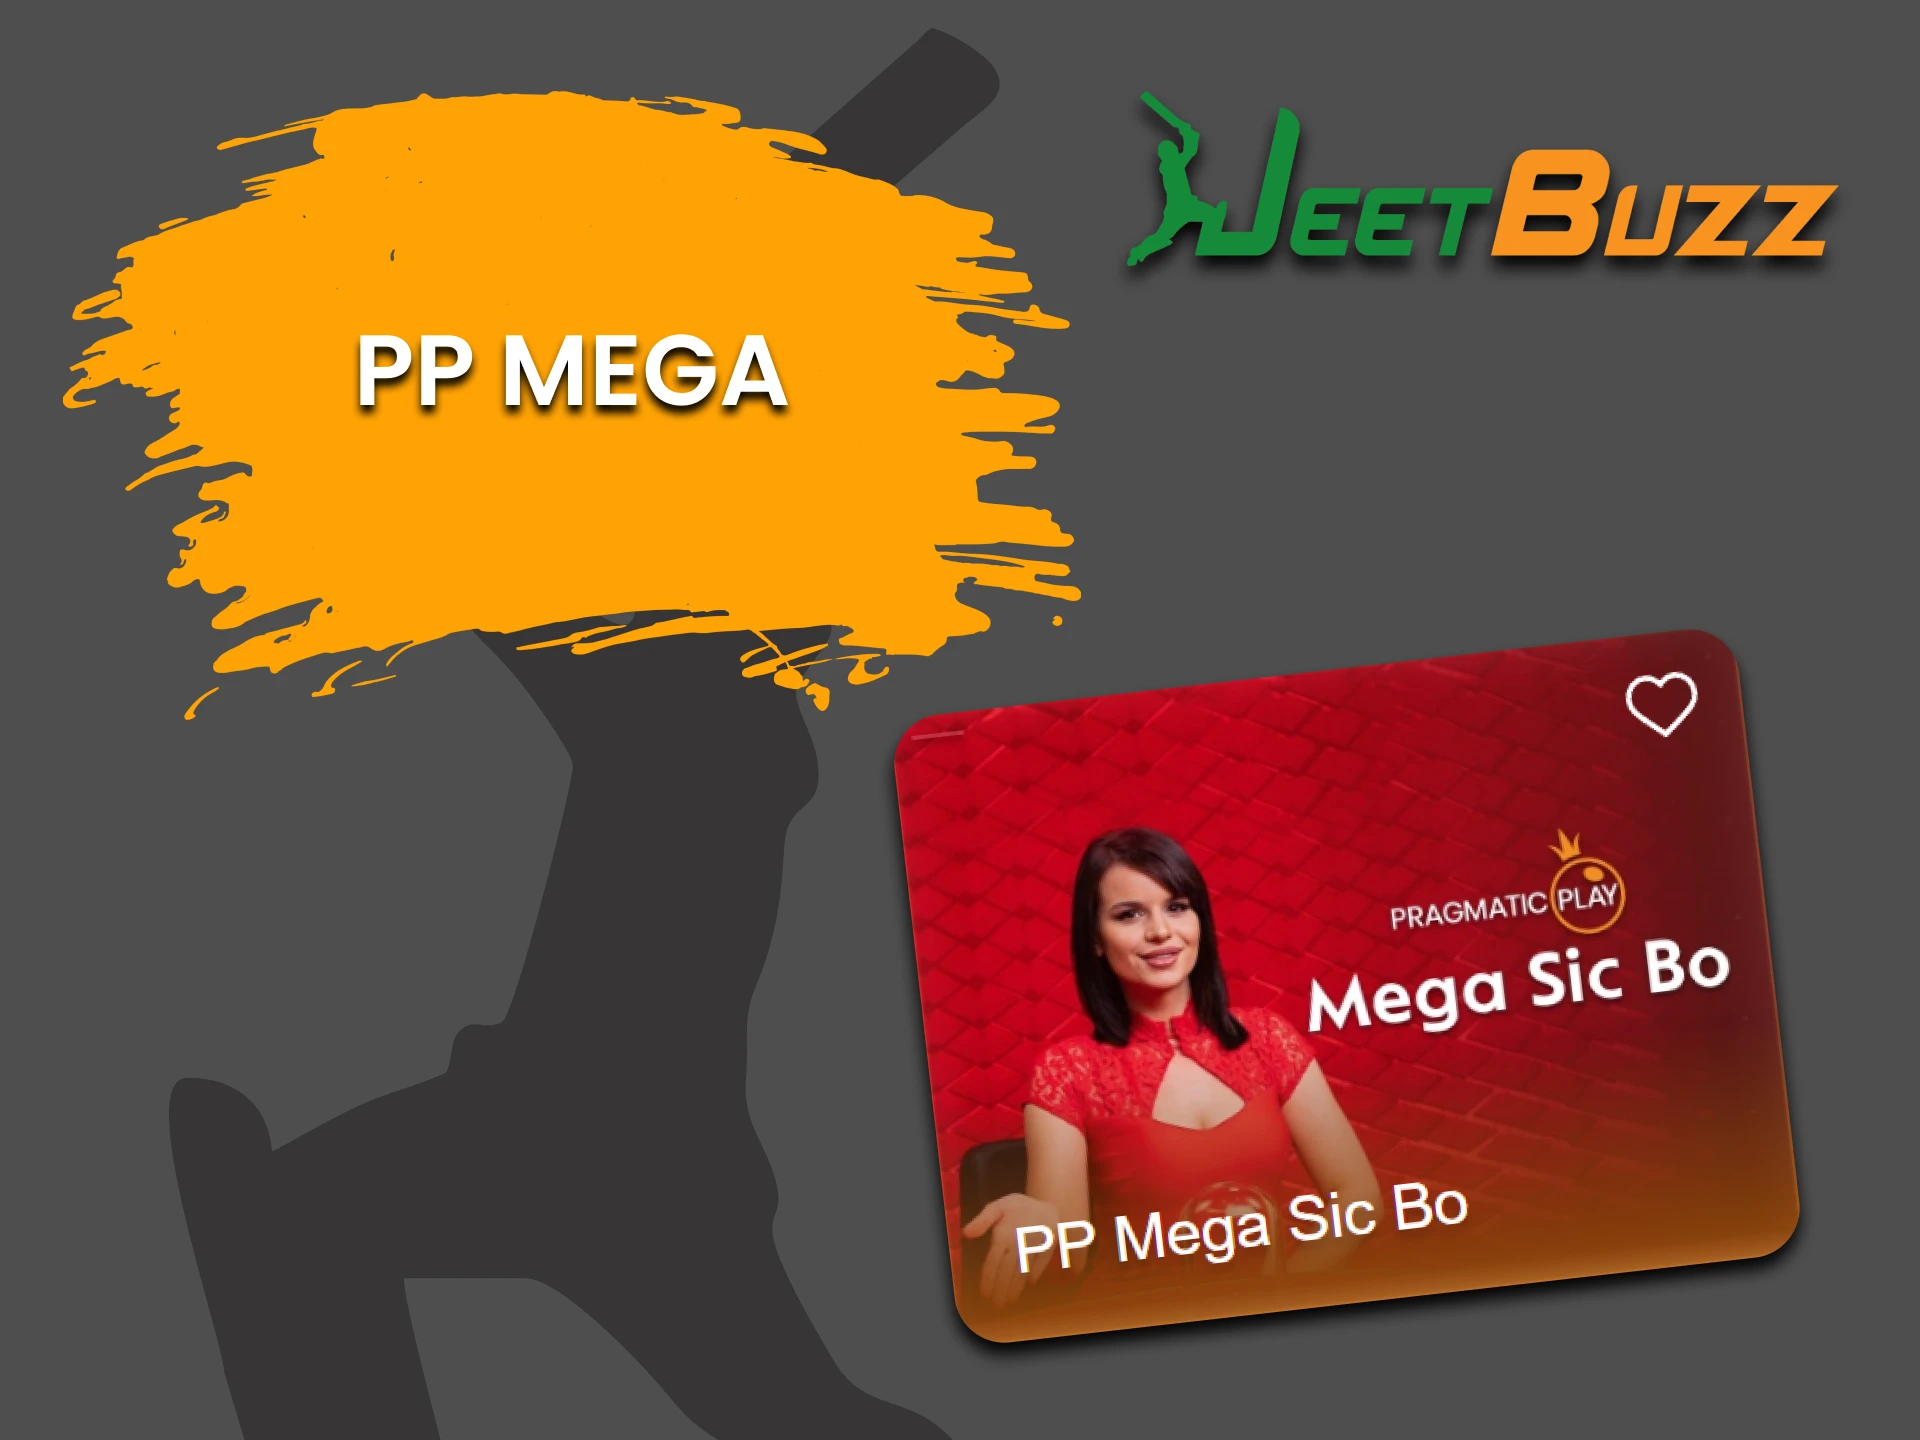 Try your hand at Sic Bo from the provider "PP Mega".